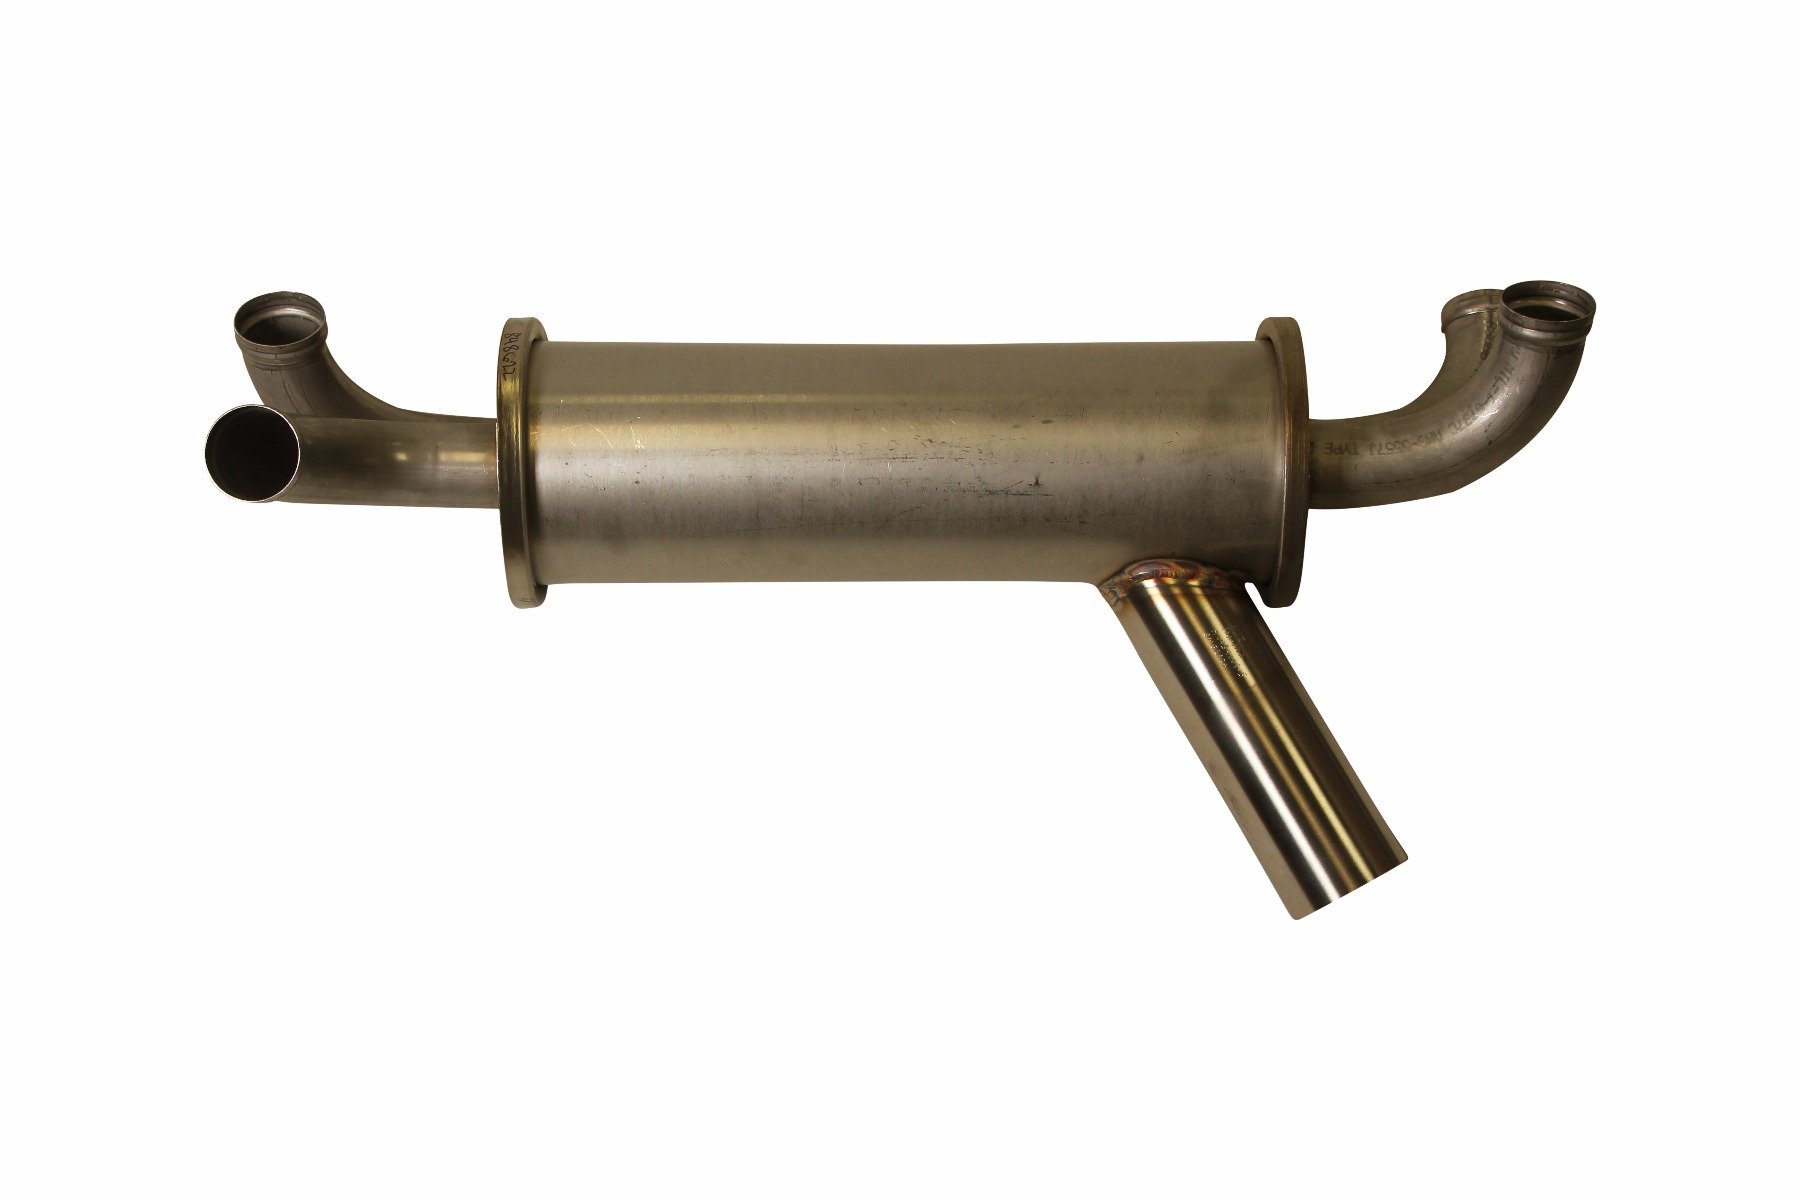 NEW PMA CESSNA 152 MUFFLER WITH ELBOWS